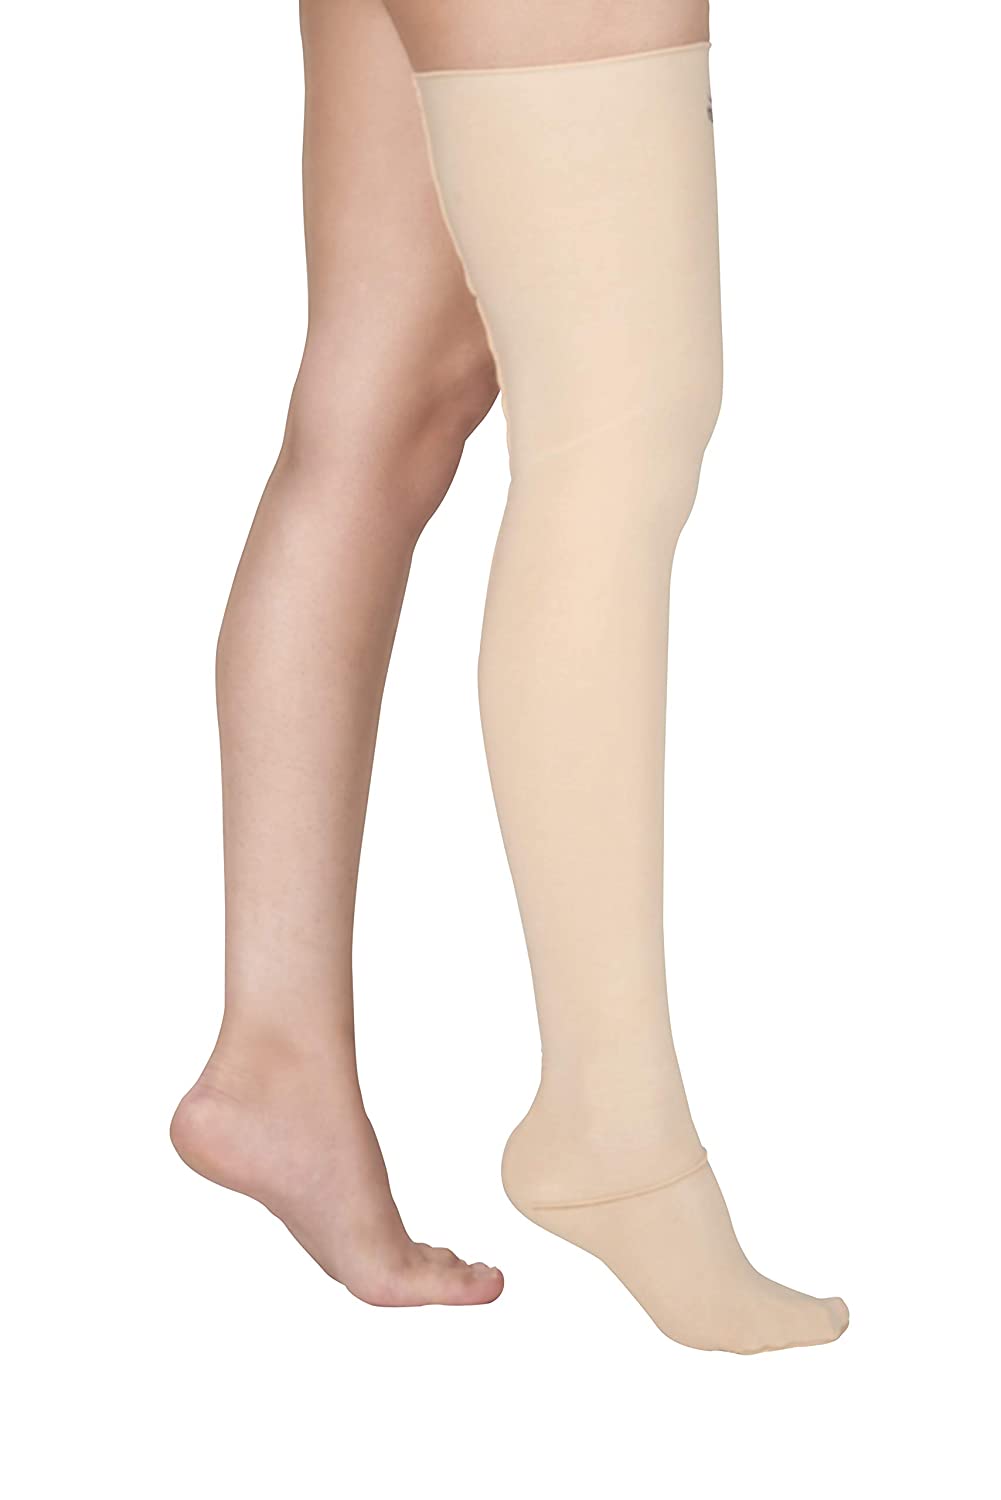 AHS Graduated 20-30 mmHg Compression Stocking for Men and Women-5